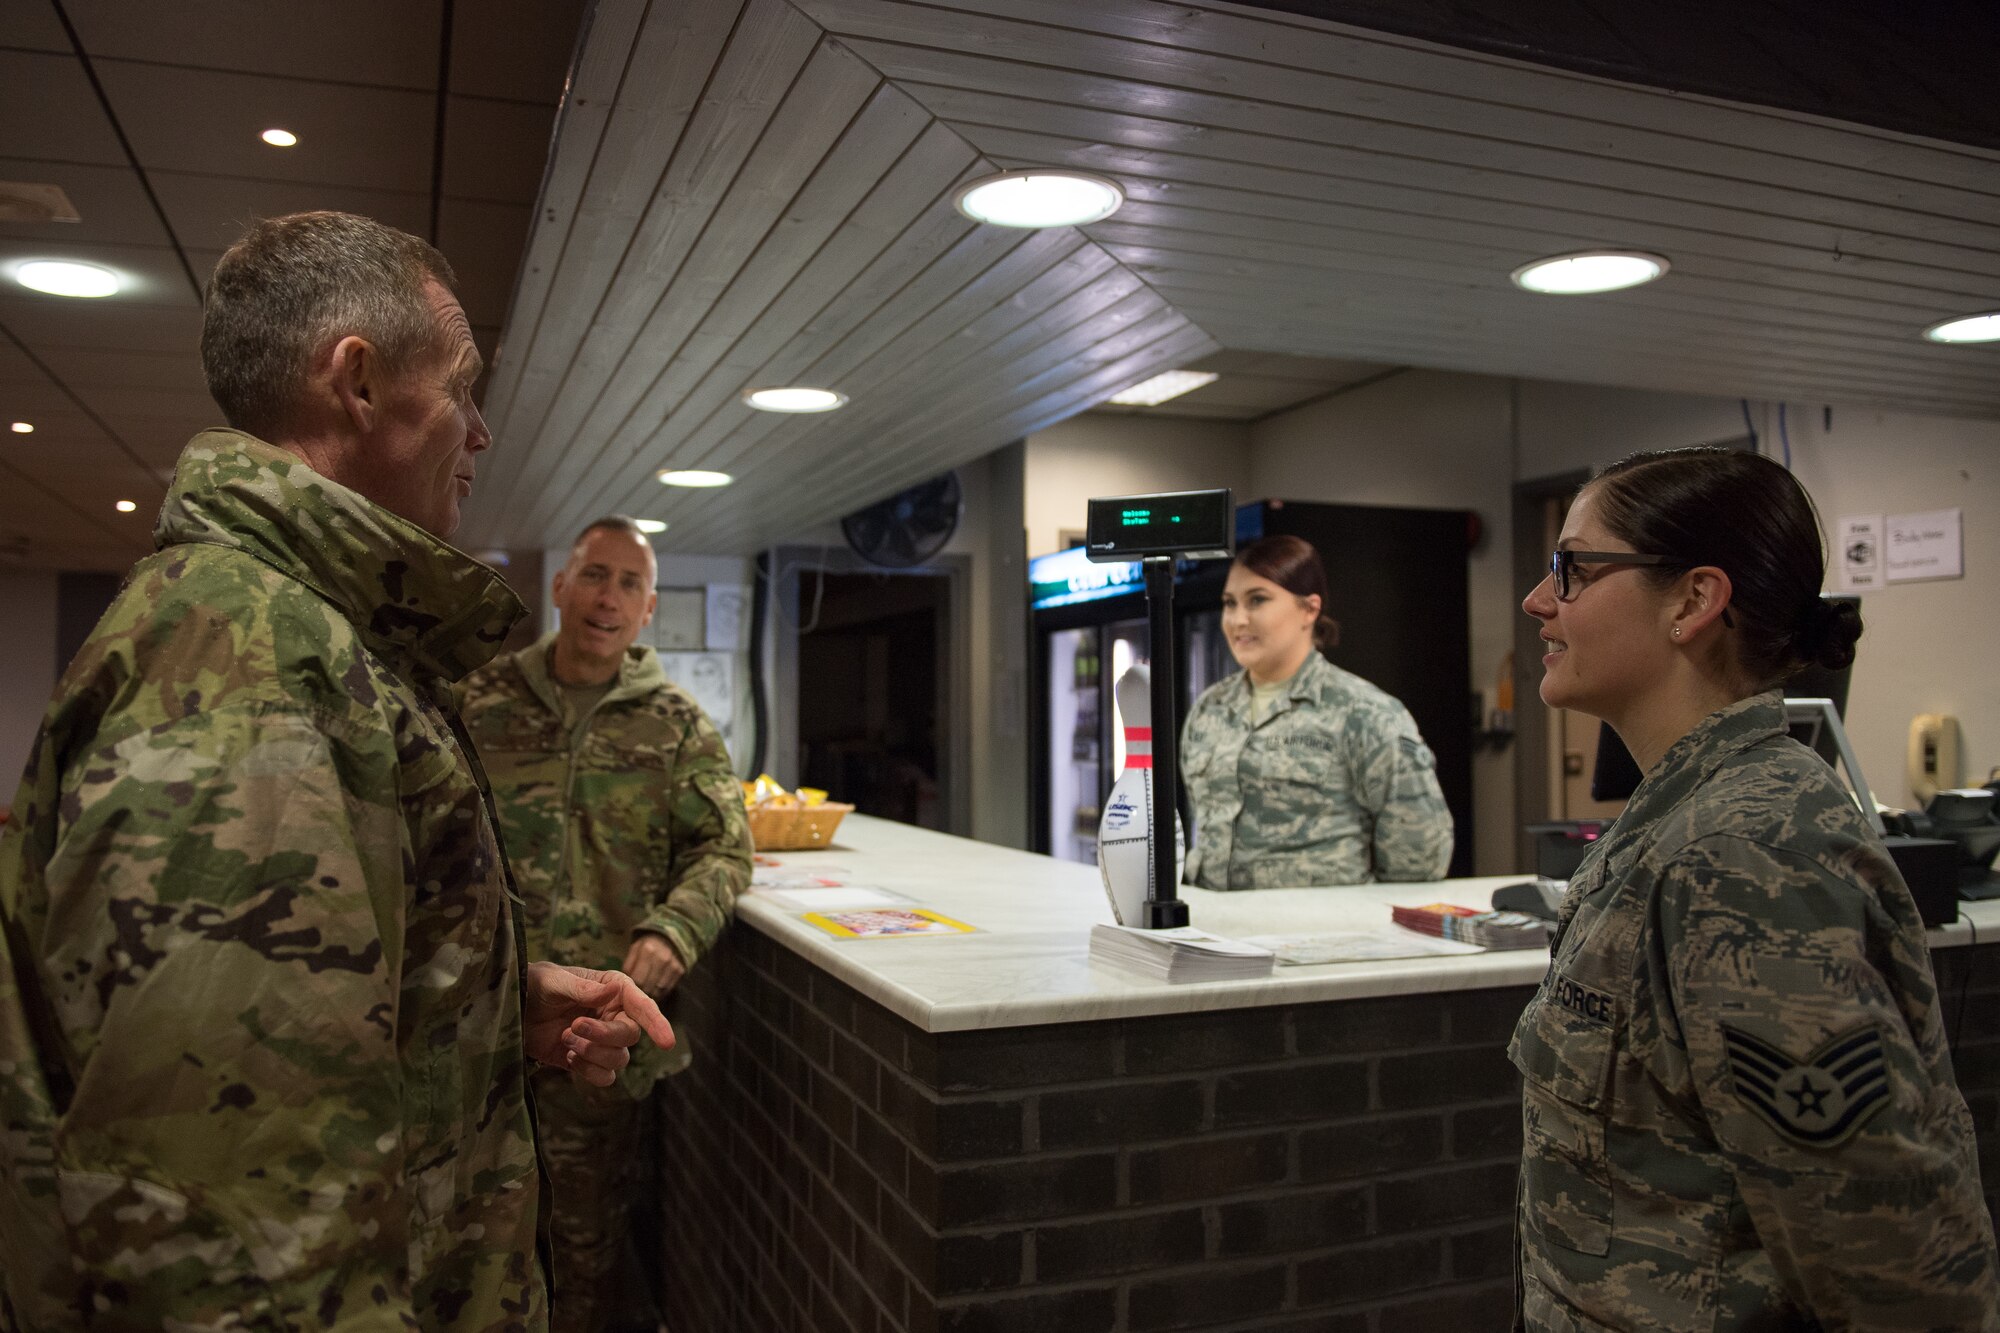 Maj. Gen. James Dawkins Jr., Eighth Air Force and Joint-Global Strike Operations Center commander (far left), and Brig. Gen. Tom Wilcox, Air Force Global Strike Command operations and communications director (center left), speak with Staff Sgt. Kelli Lewis, 2nd Force Support Squadron community partnership programs office craftsman (far right), and Senior Airman Katelyn Kent, 2nd FSS fitness journeyman (center right), both deployed from Barksdale Air Force Base, La., at RAF Fairford, England, April 4, 2019. Dawkins and Wilcox spent the day traveling around base to talk to Airmen regarding their time and efforts supporting a U.S. Strategic Command Bomber Task Force in Europe. (U.S. Air Force photo by Airman 1st Class Tessa B. Corrick)